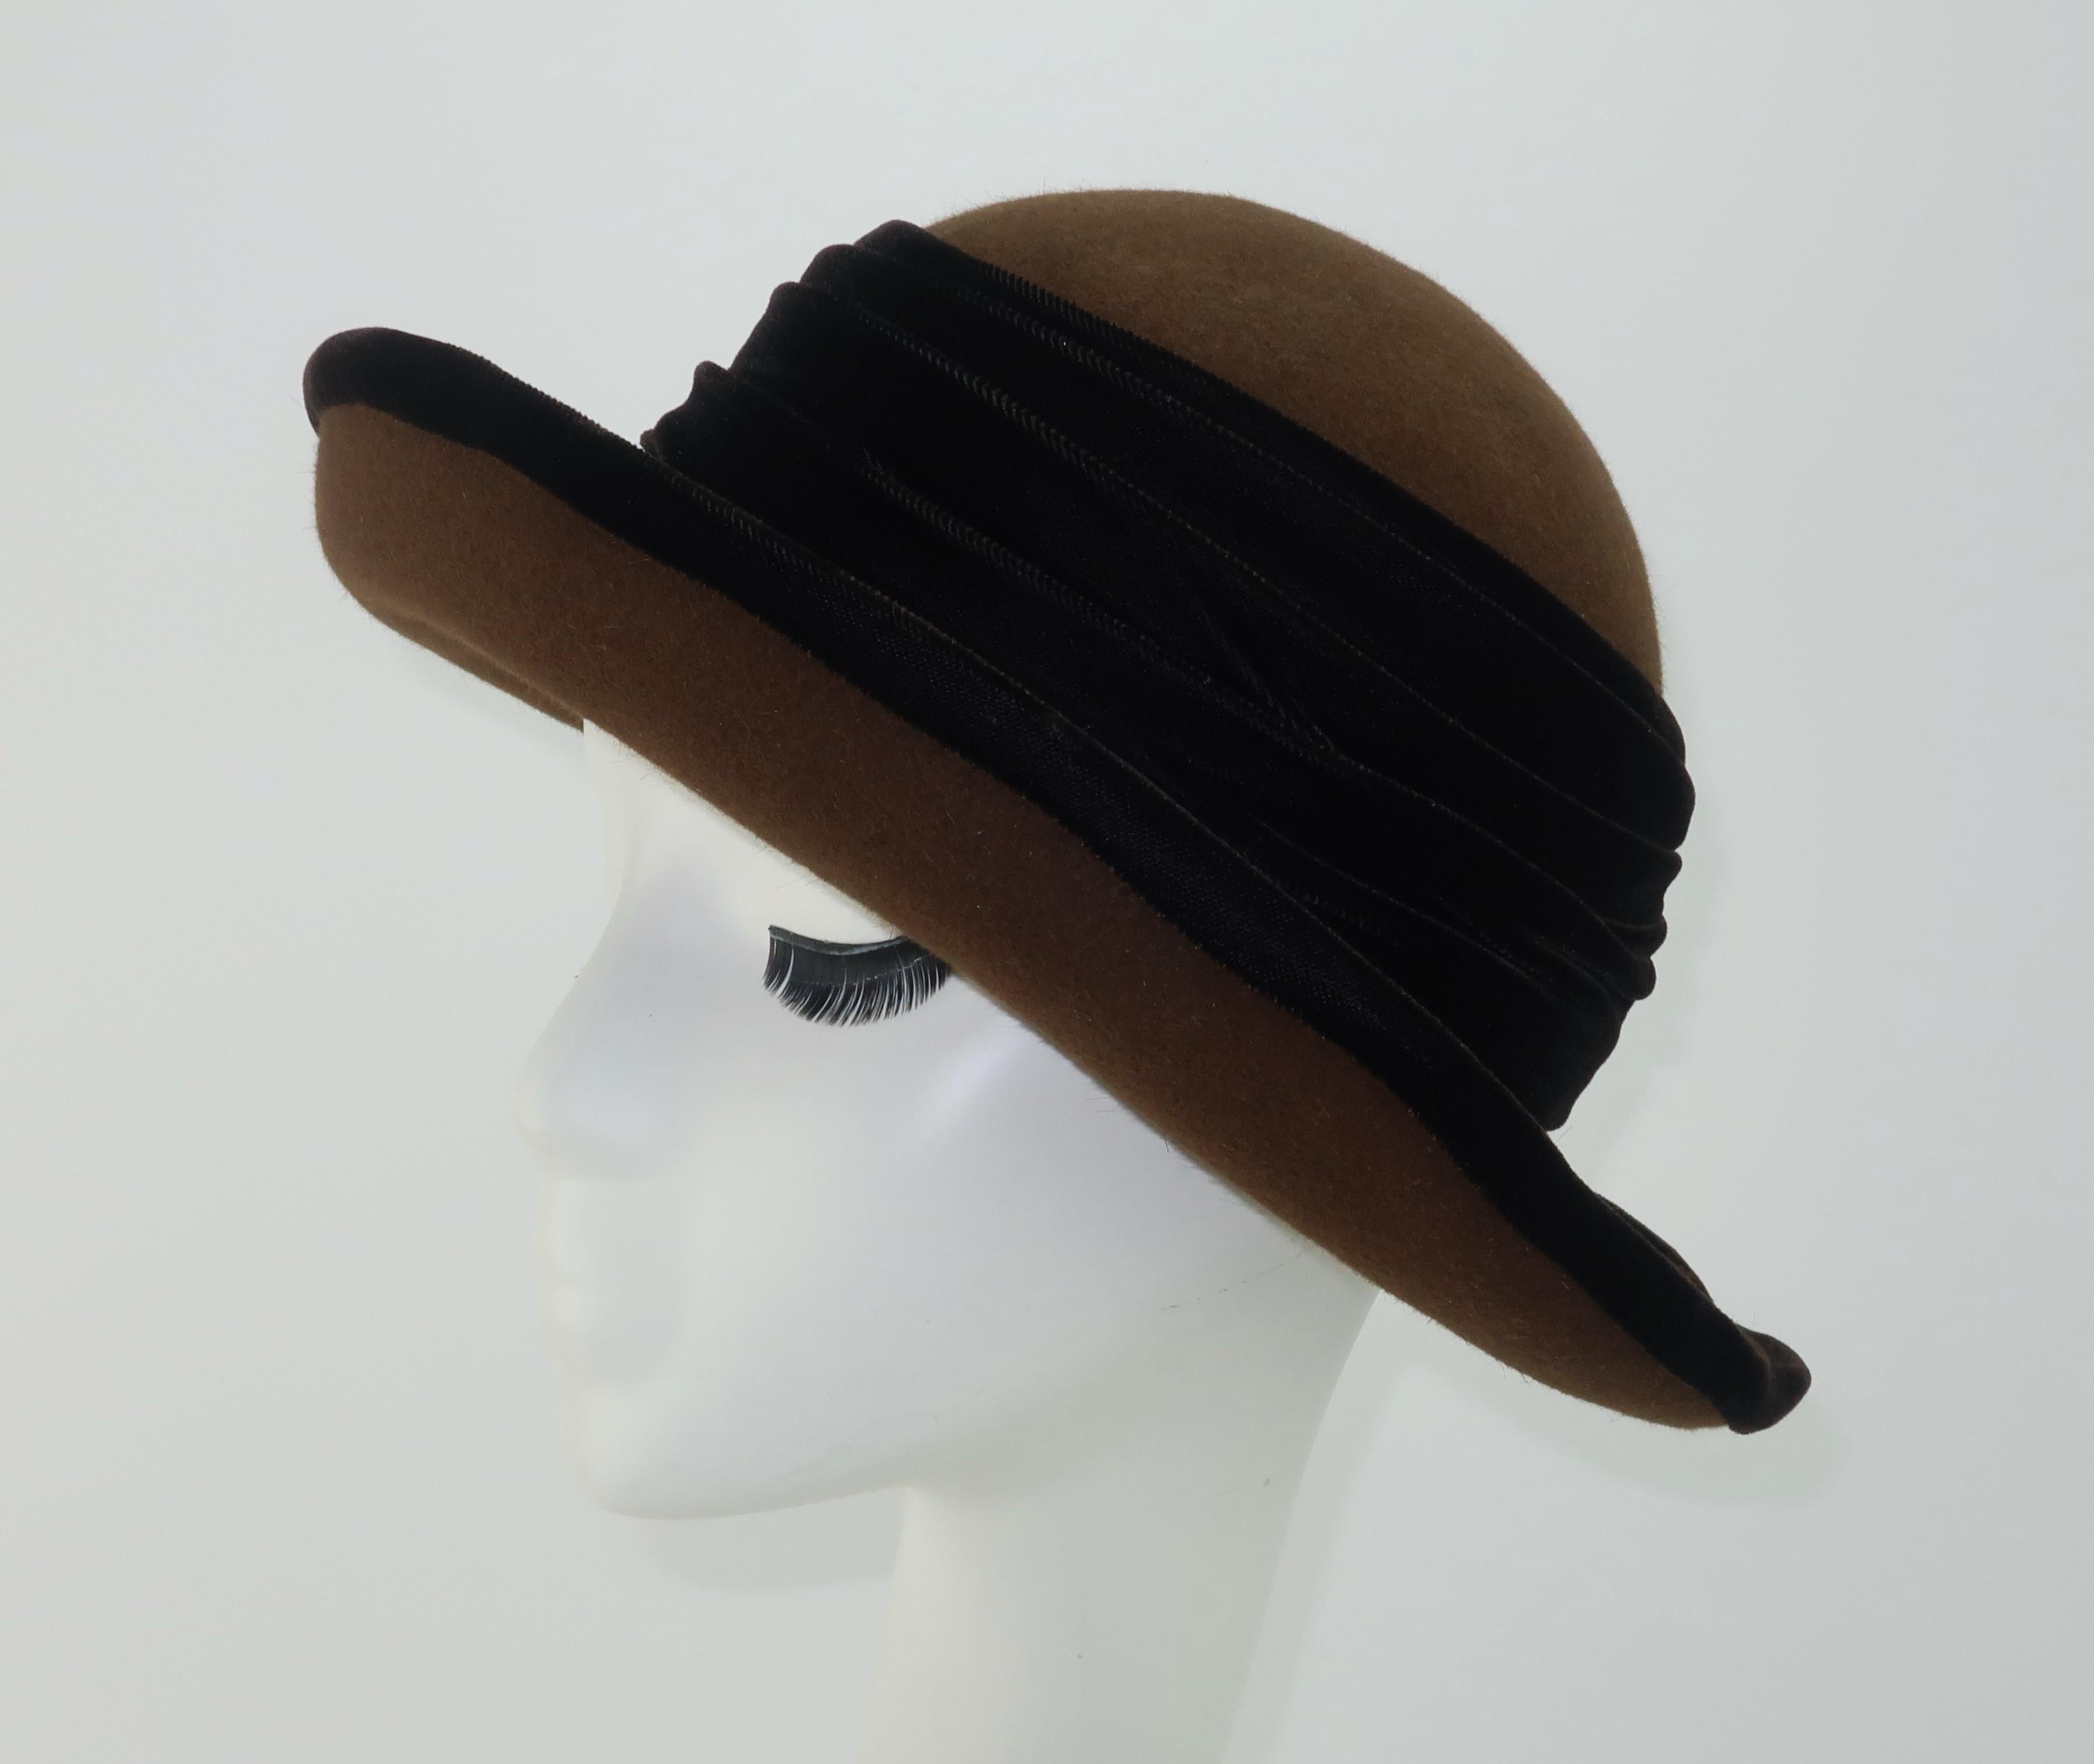 Late 20th century Frank Olive brown wool kettle brim hat with dark brown velvet trim and ruched band.  The interior rim is lined in hot pink grosgrain ribbon, a Frank Olive hallmark.  The classic hat has a definitive Annie Hall style and is perfect